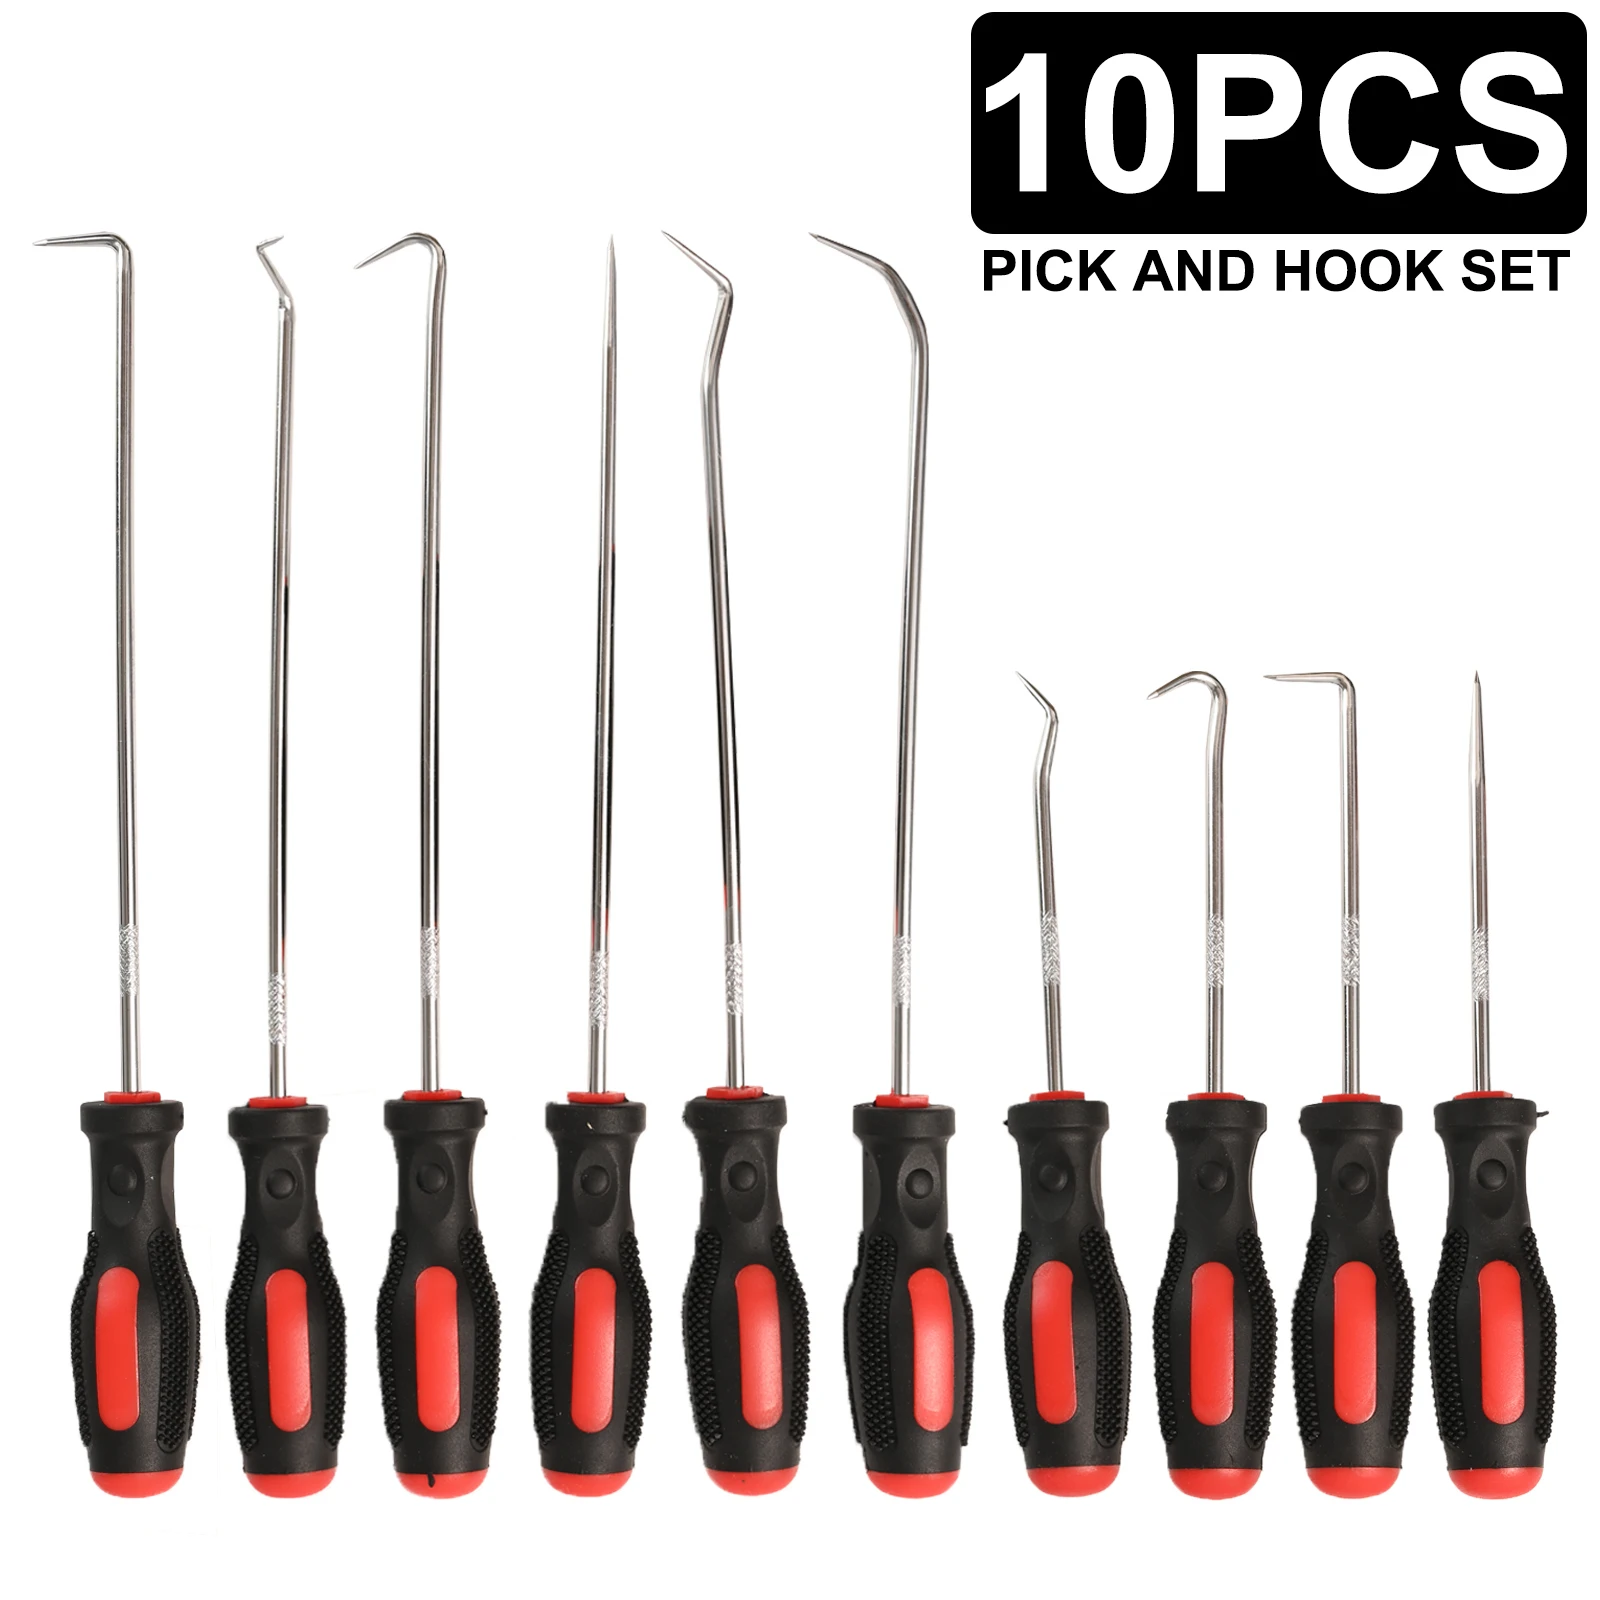 

10pcs Car Pick And Hook Set O Ring Seal Gasket Puller Oring Removal Screwdriver Hand Tool Oil Sealing Auto Vehicle Repair Tools